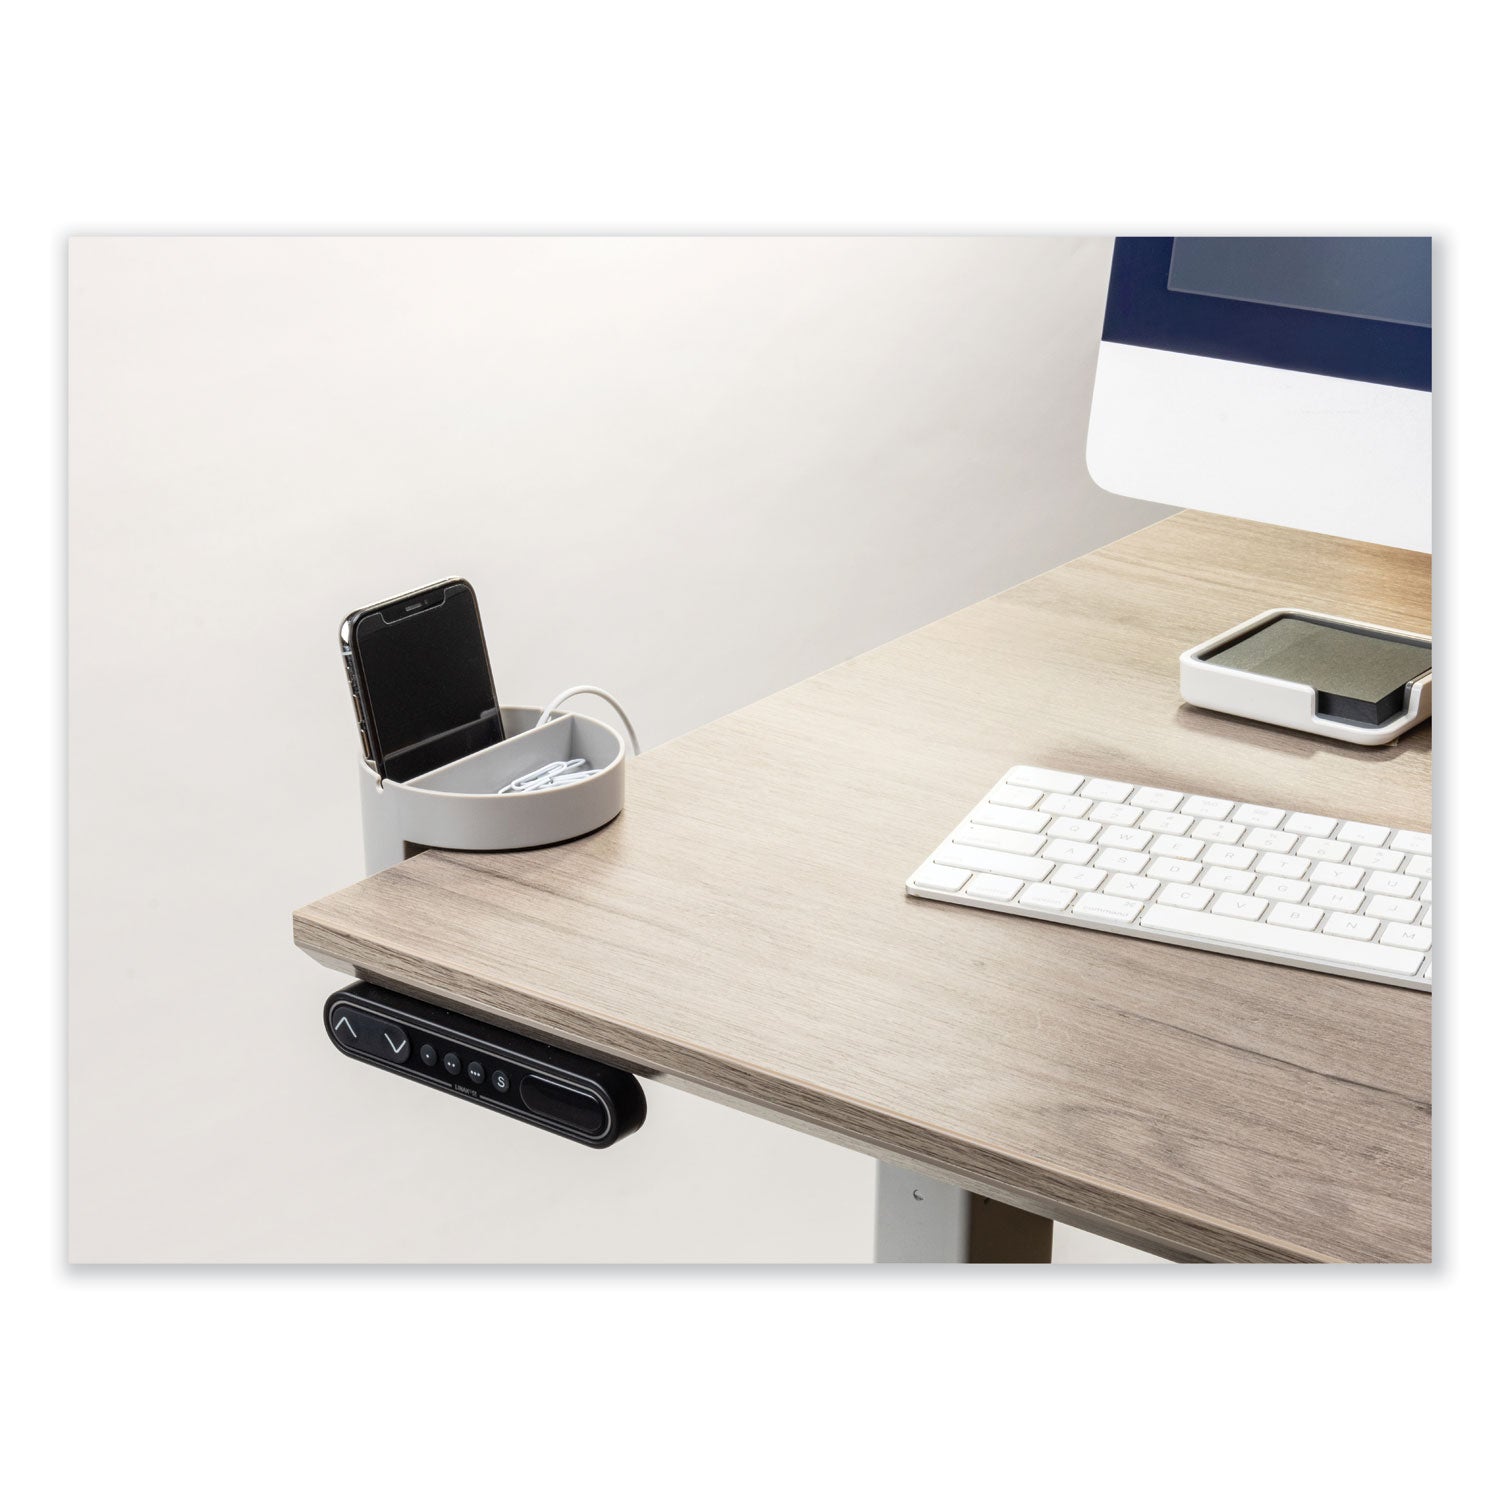 standing-desk-small-desk-organizer-two-sections-385-x-385-x-354-gray_def400001 - 2